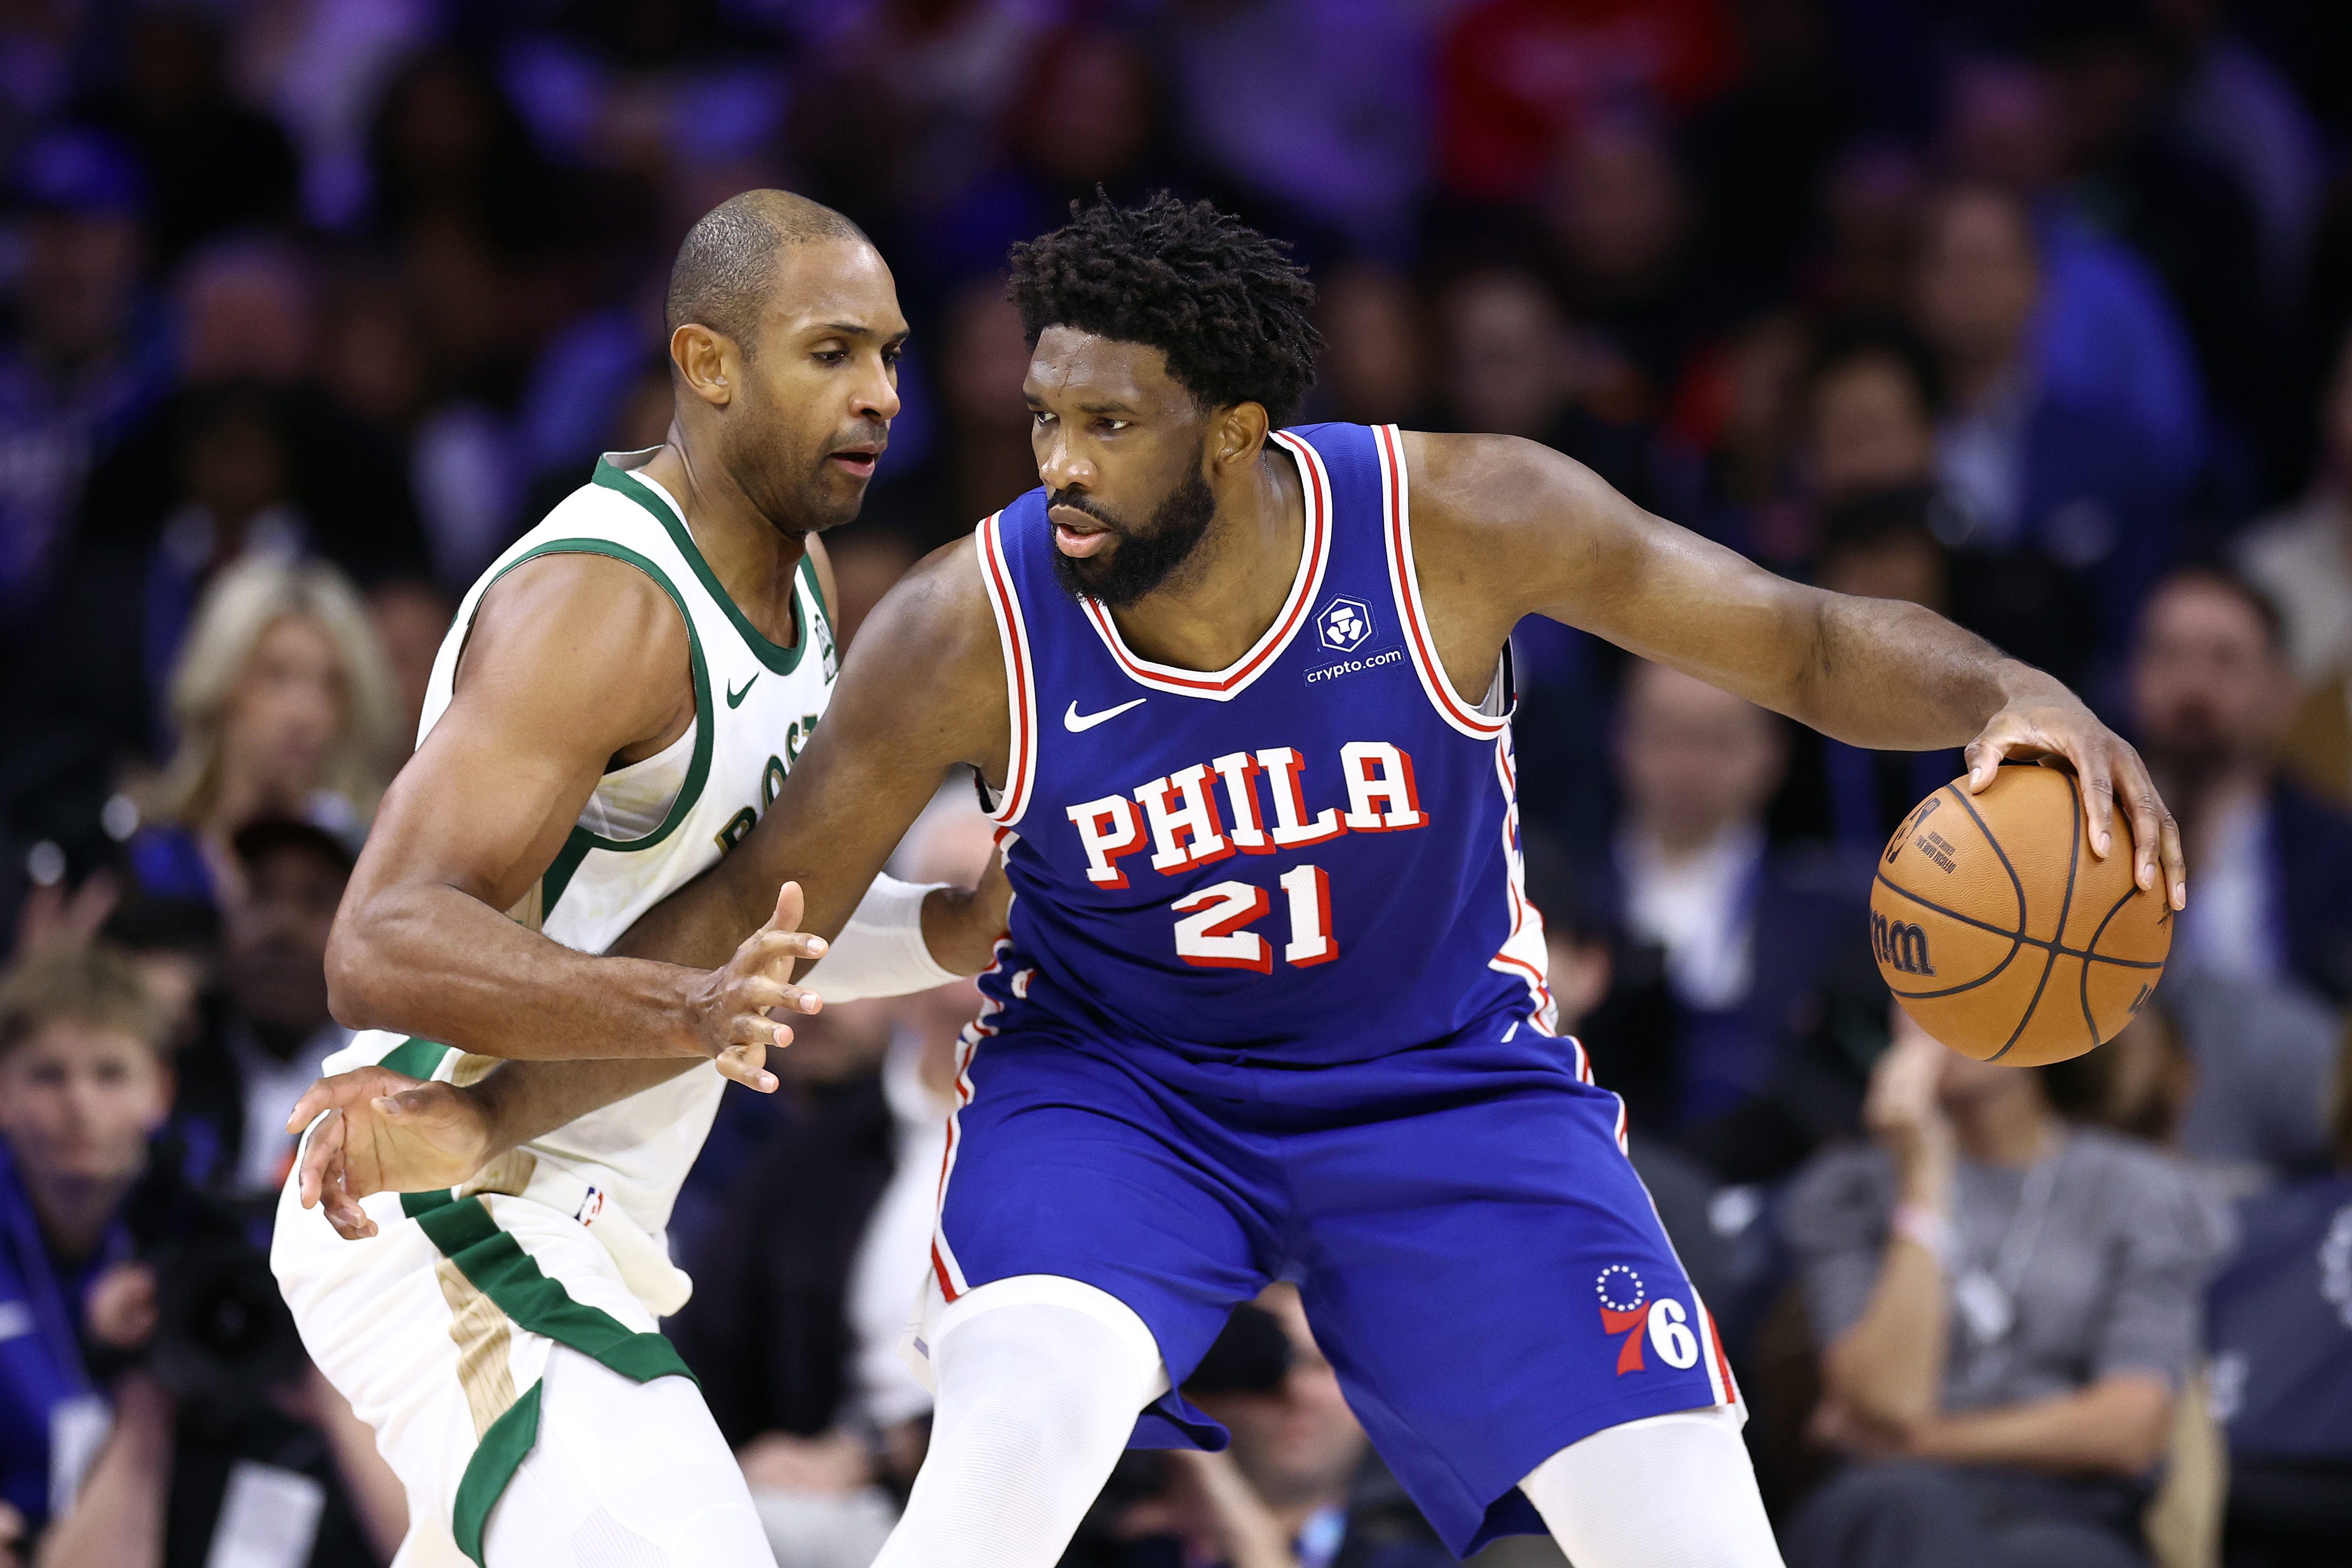 Ranking the Celtics' competition in the East next season: No. 1 - Philadelphia 76ers